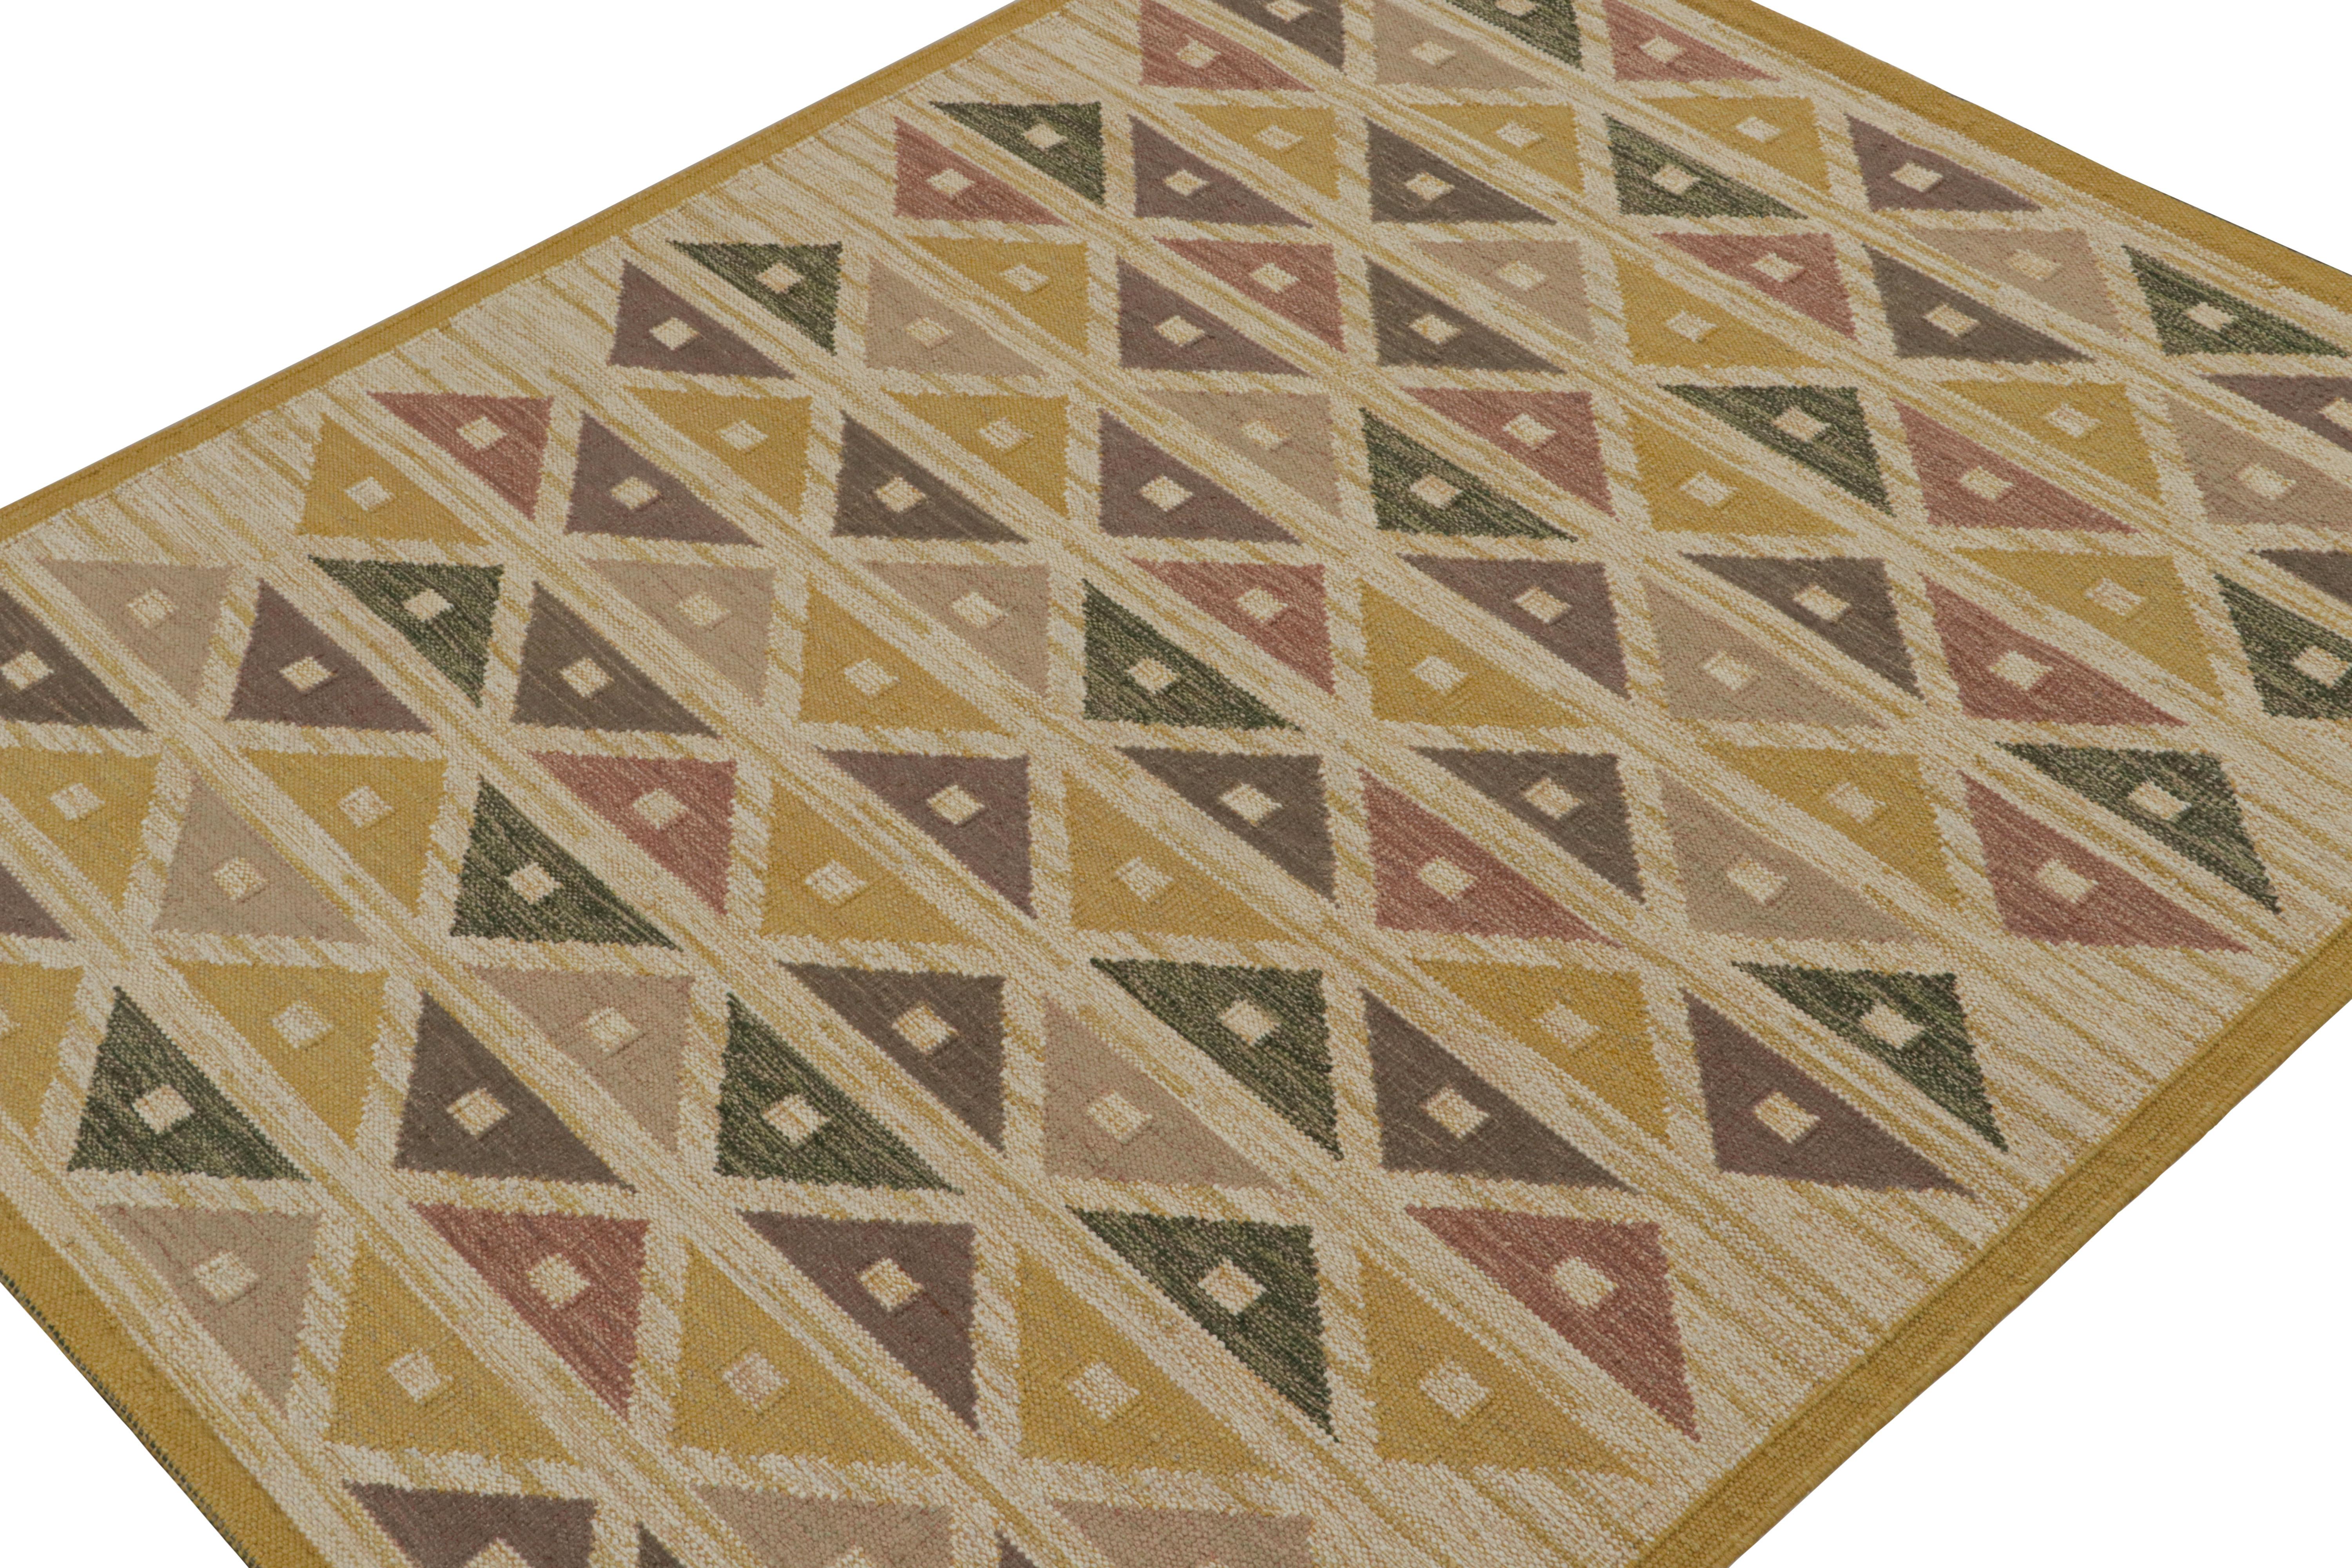 An 8x10 Swedish style kilim from our award-winning Scandinavian flat weave collection. Handwoven in wool, cotton & undyed natural yarns

On the Design: 

This rug enjoys geometric patterns in gold, red & brown. Keen eyes will admire undyed, natural